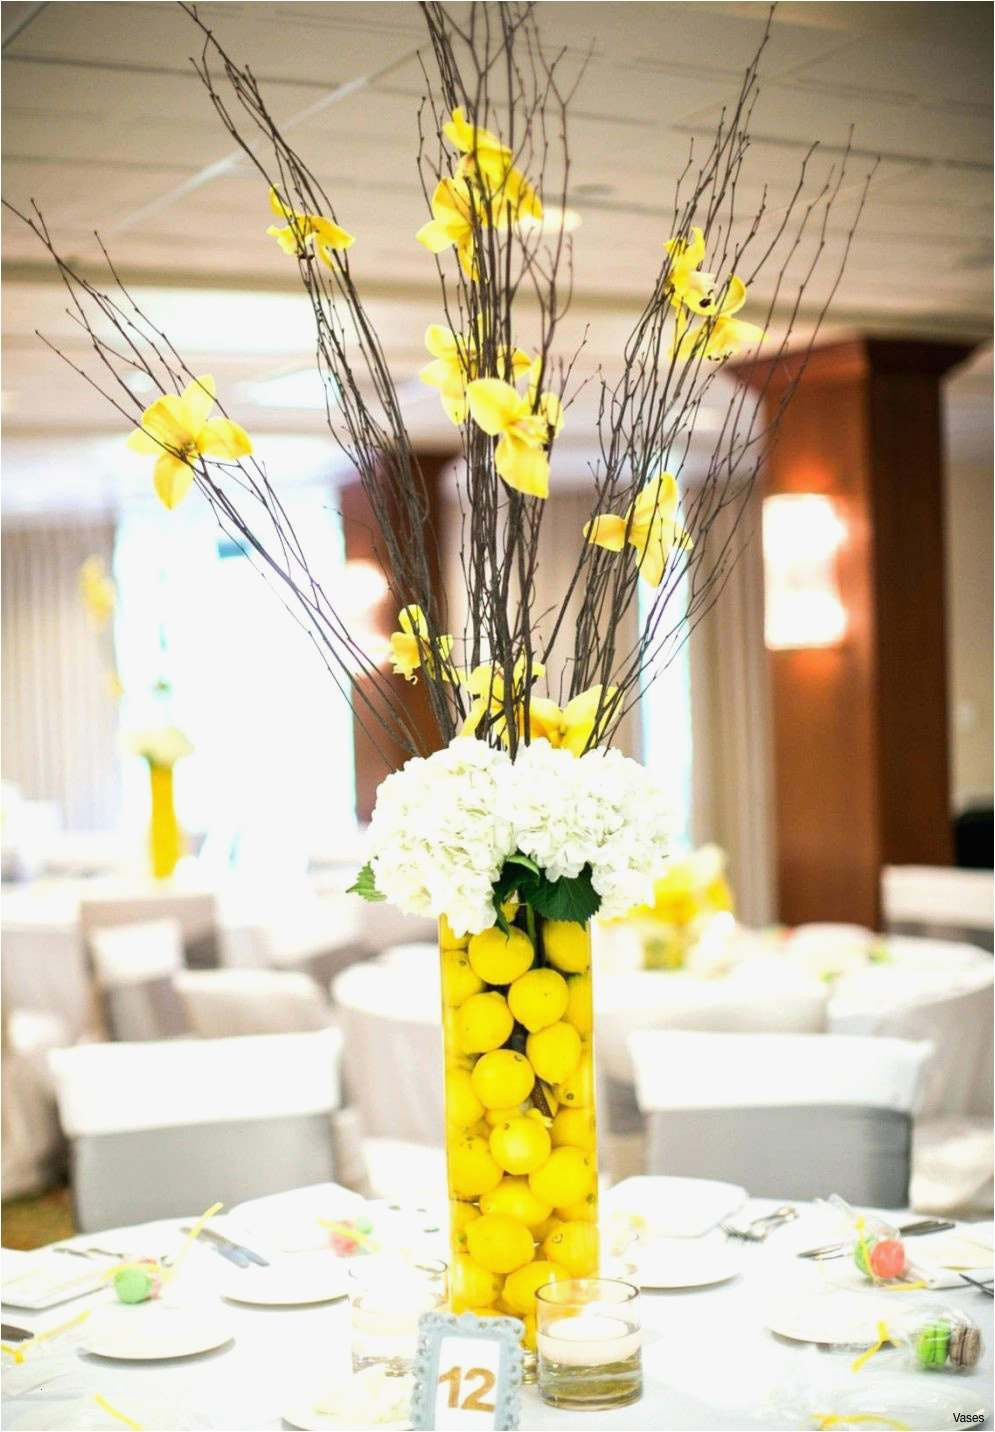 17 Popular Picture Frame Vase Centerpiece 2024 free download picture frame vase centerpiece of wedding flowers ideas style diy wood picture frame ideas within wedding flowers ideas ideas unique diy wedding decorations handy fashions 2018